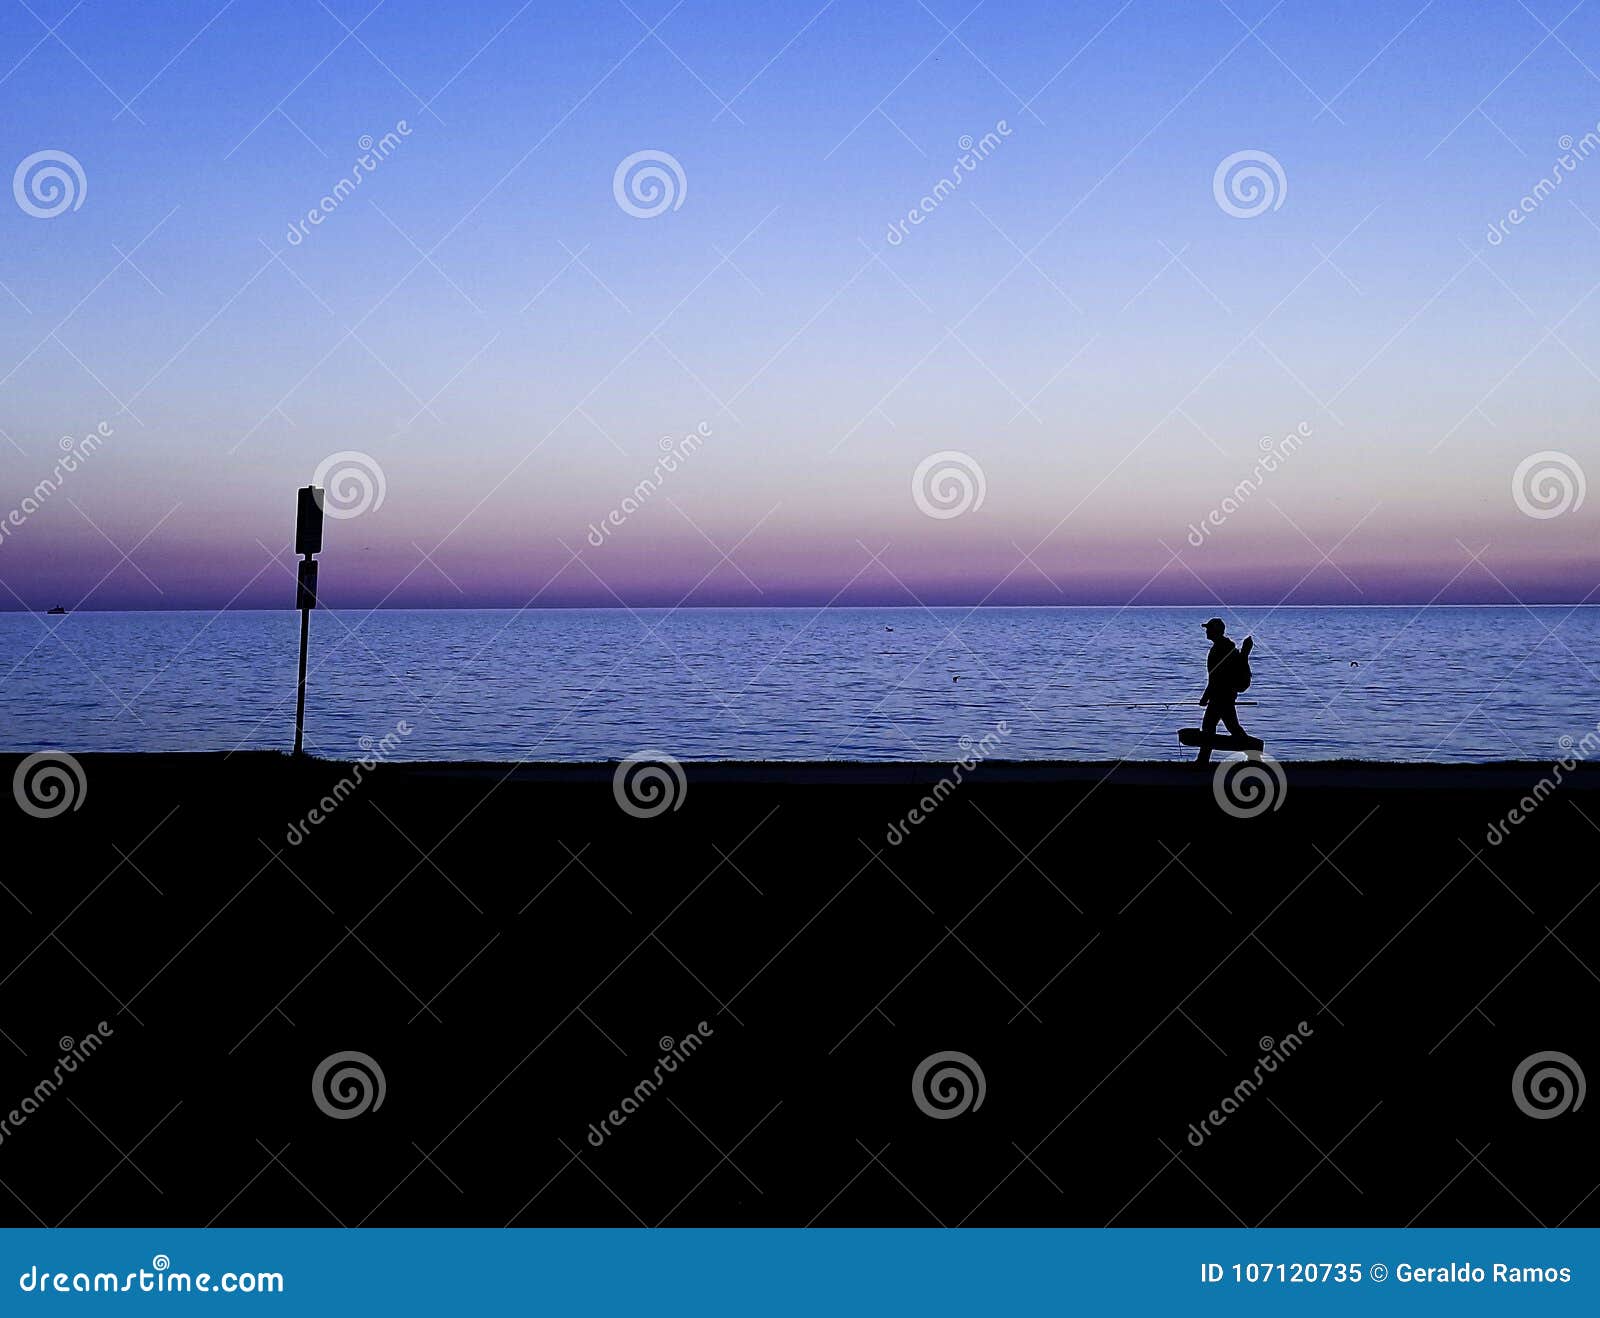 the fisherman at dusk in chicago